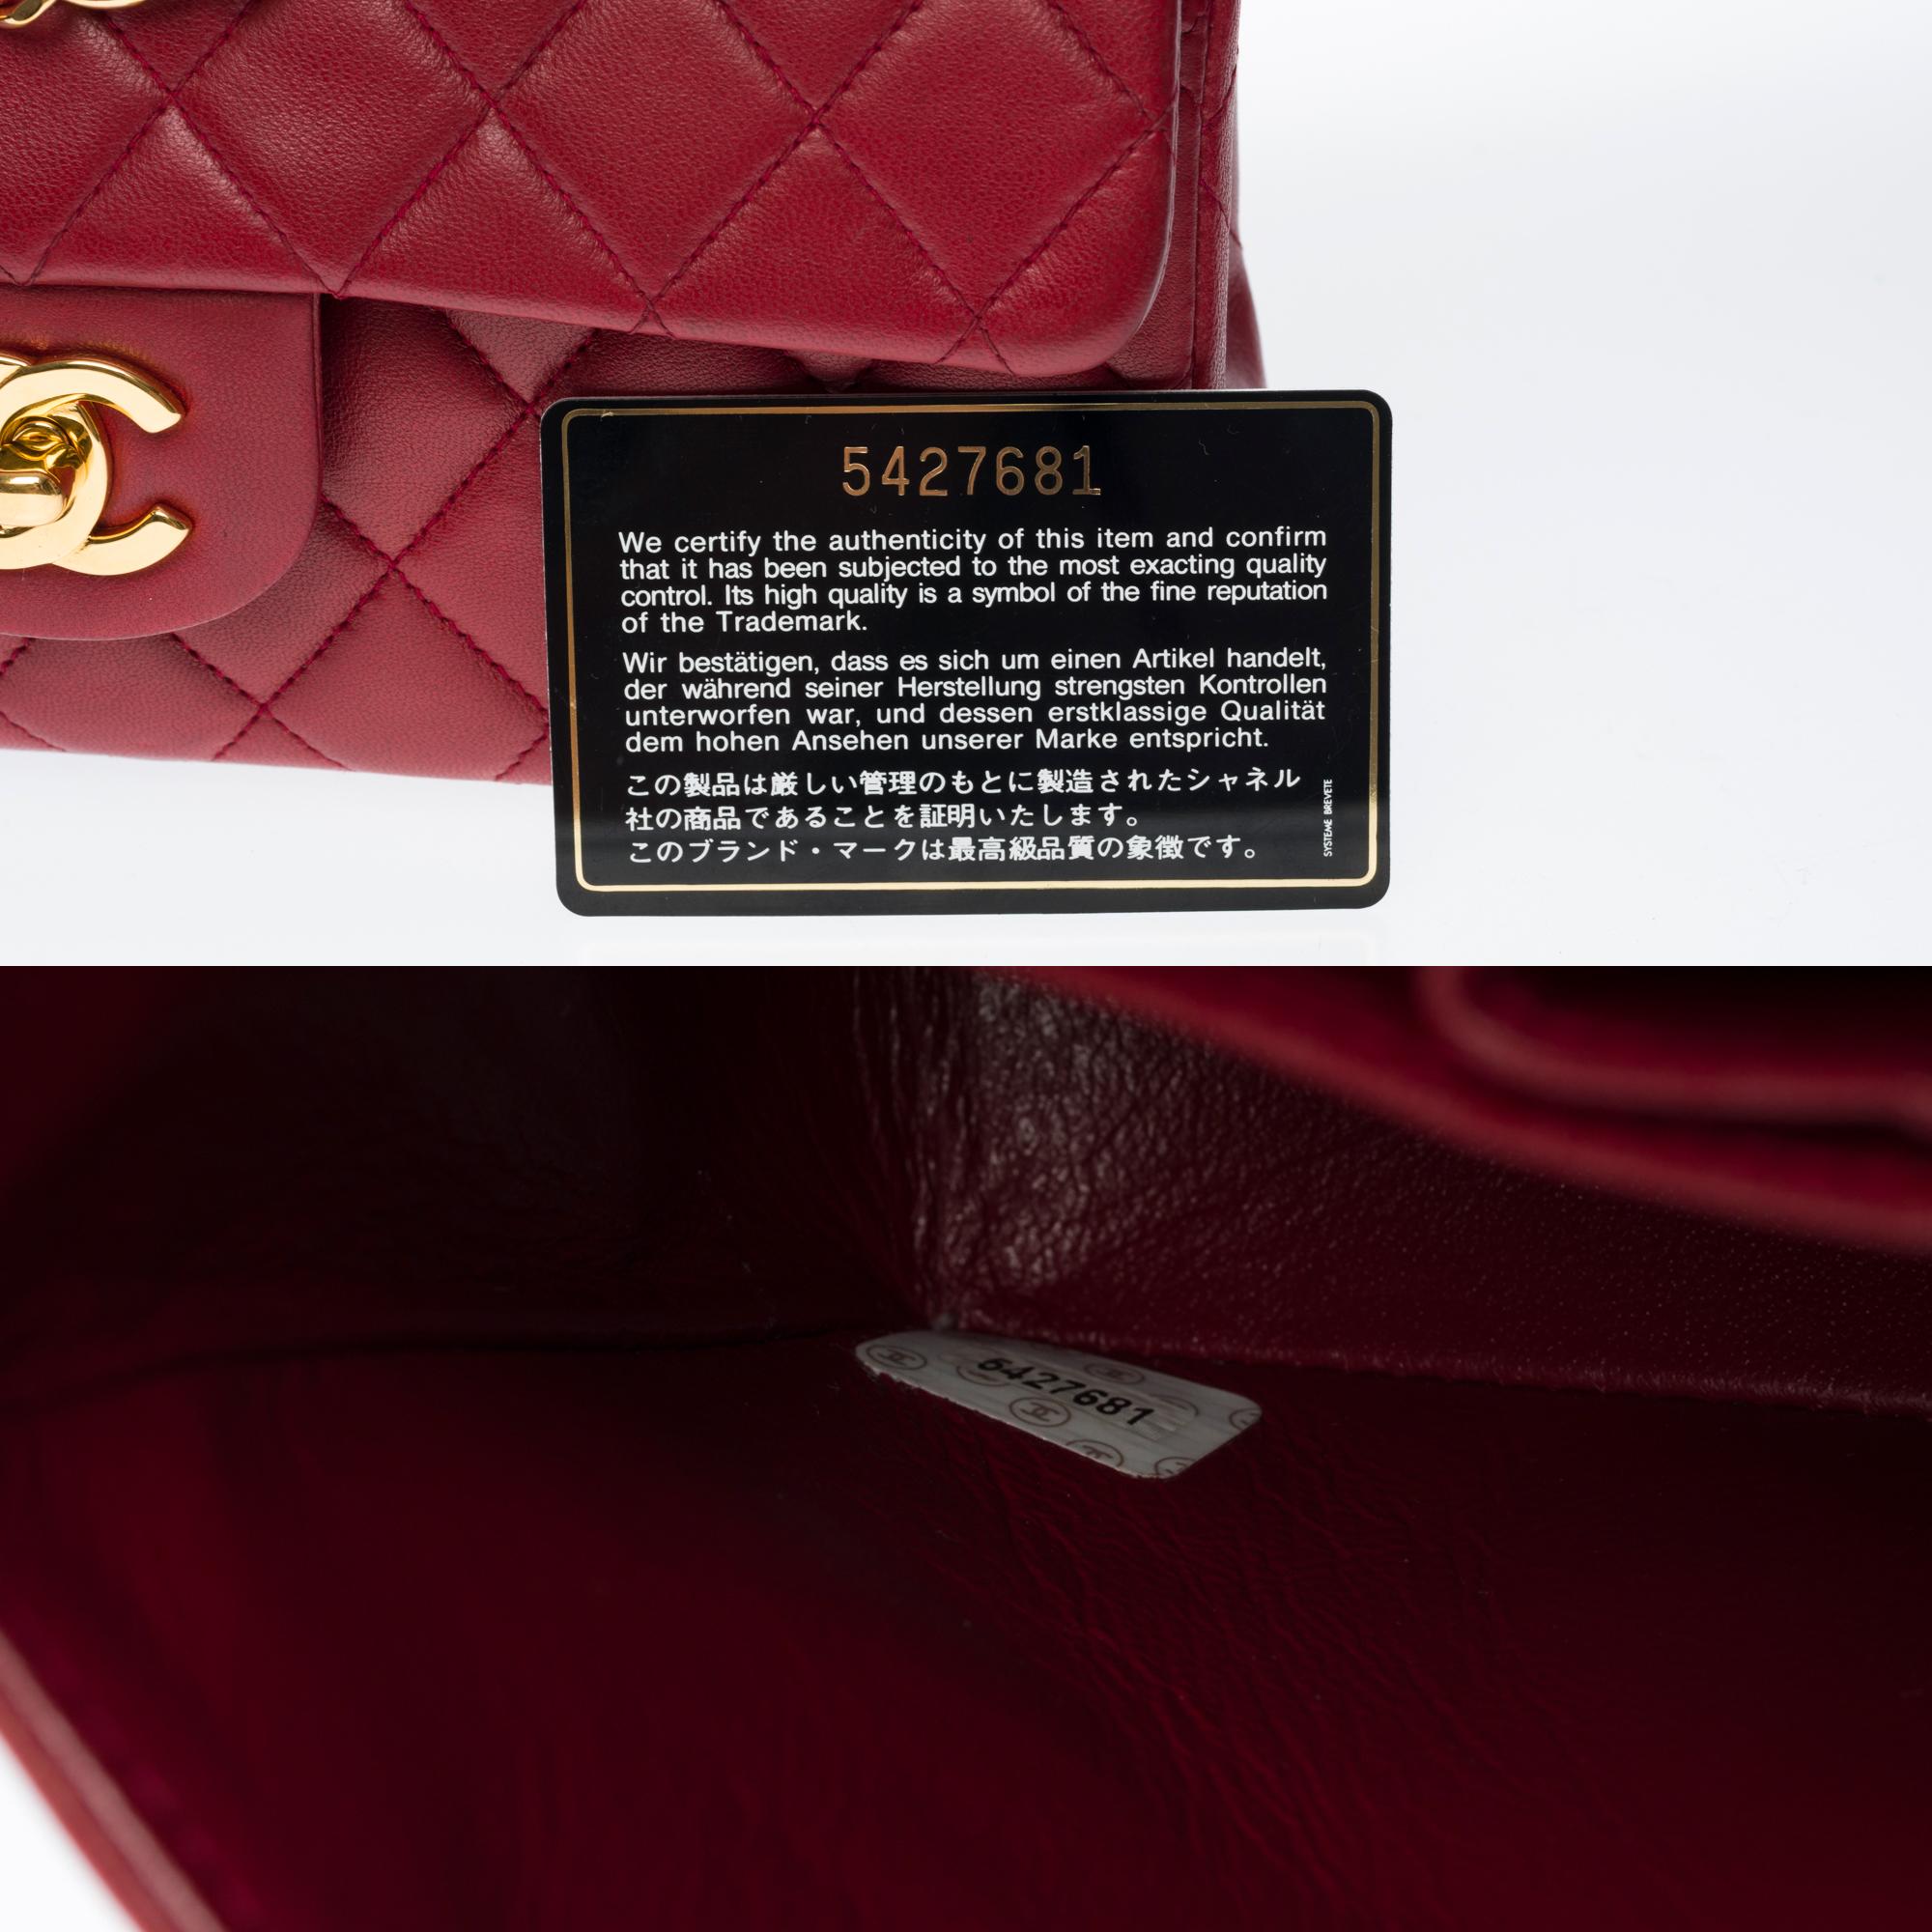 Chanel Timeless 23cm double flap Shoulder bag in red quilted lambskin, GHW 1